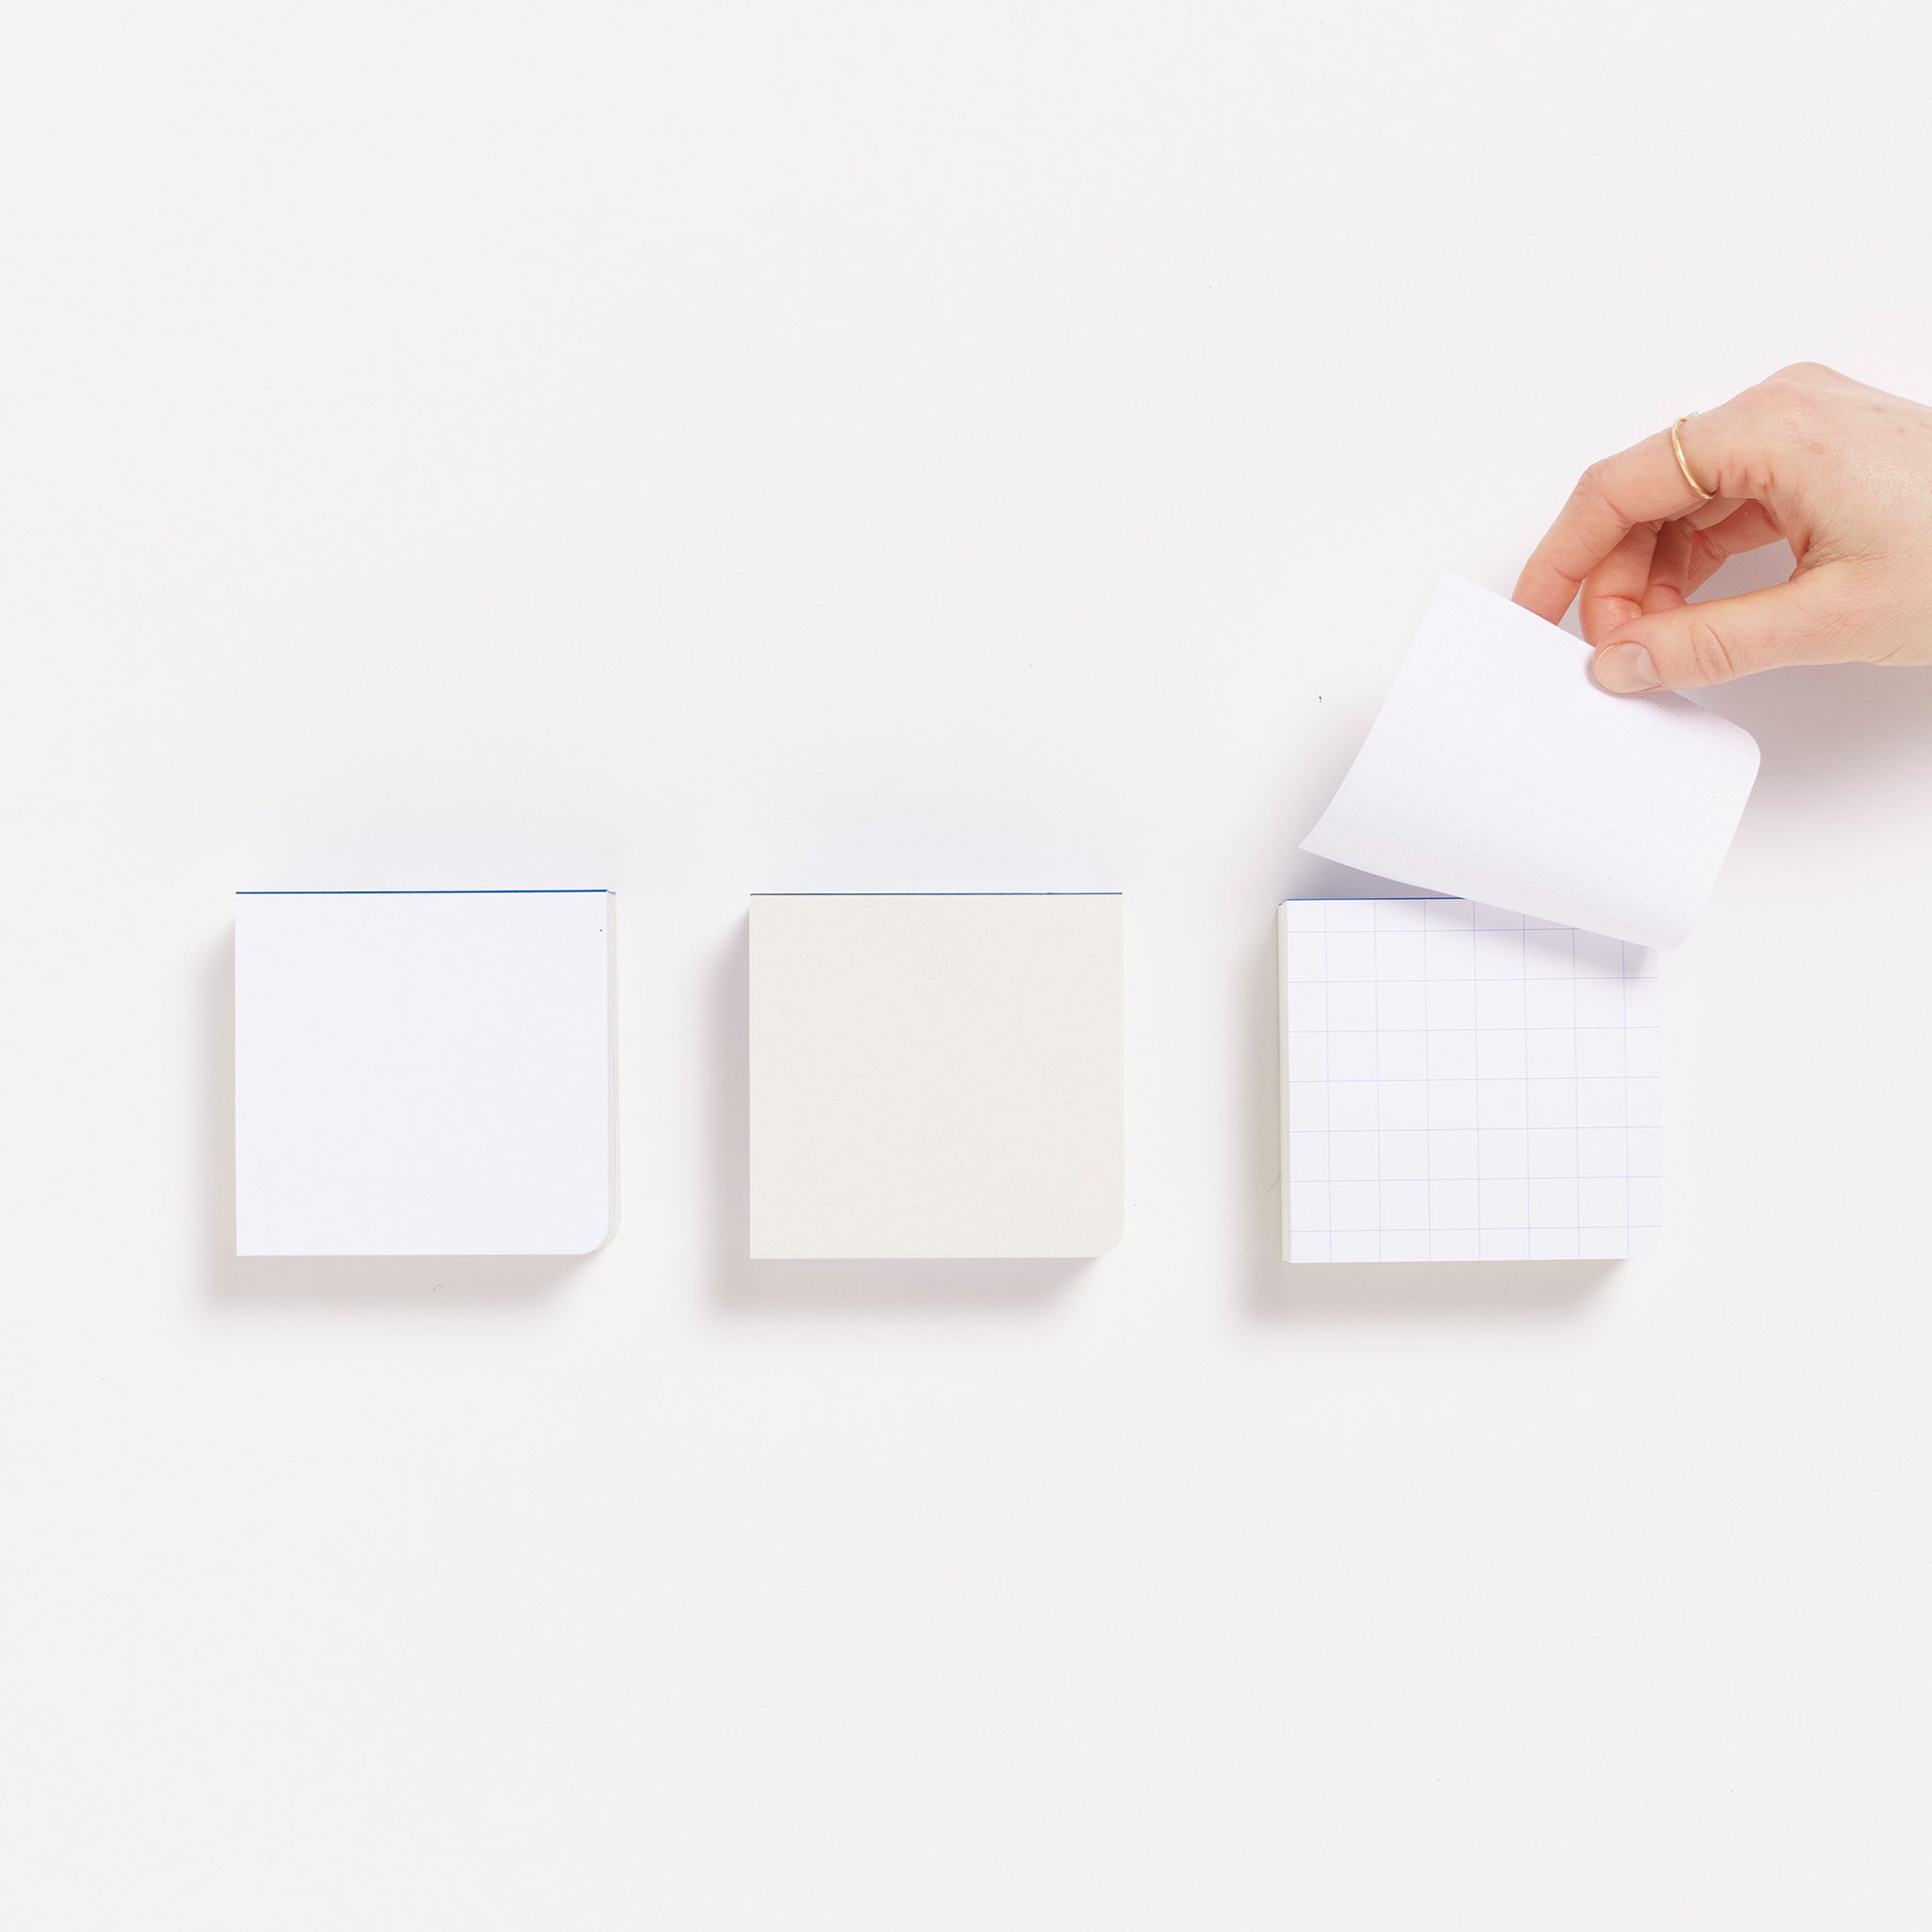 No more lost ideas and forgotten thoughts - keep everything in one place with our Blocnote.